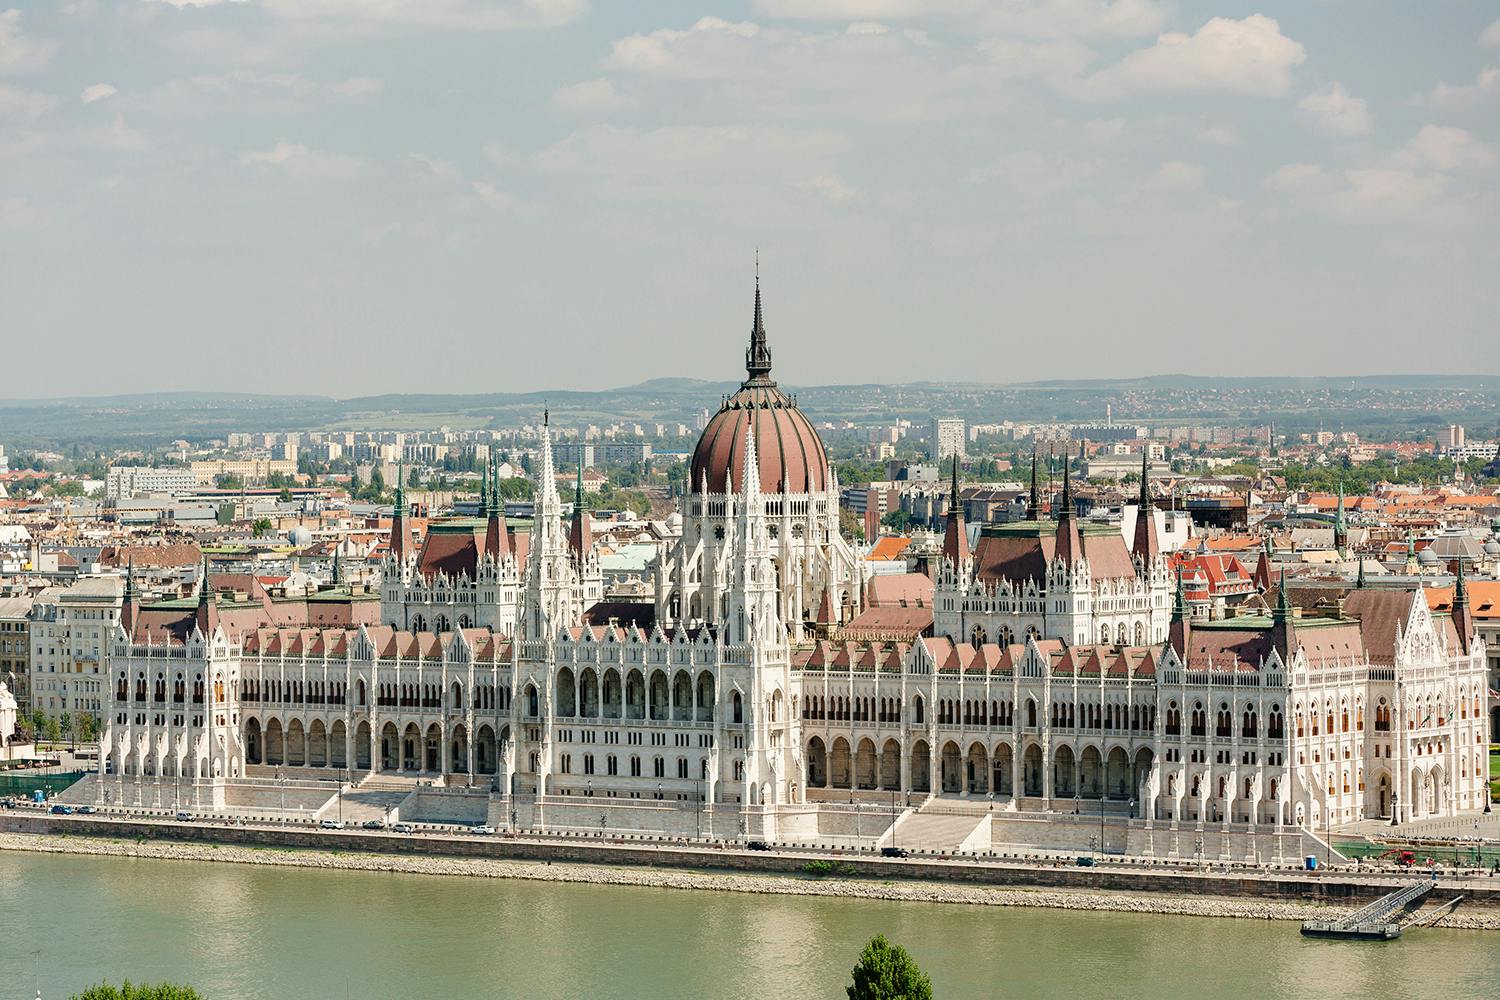 Full-day trip to Budapest from Vienna